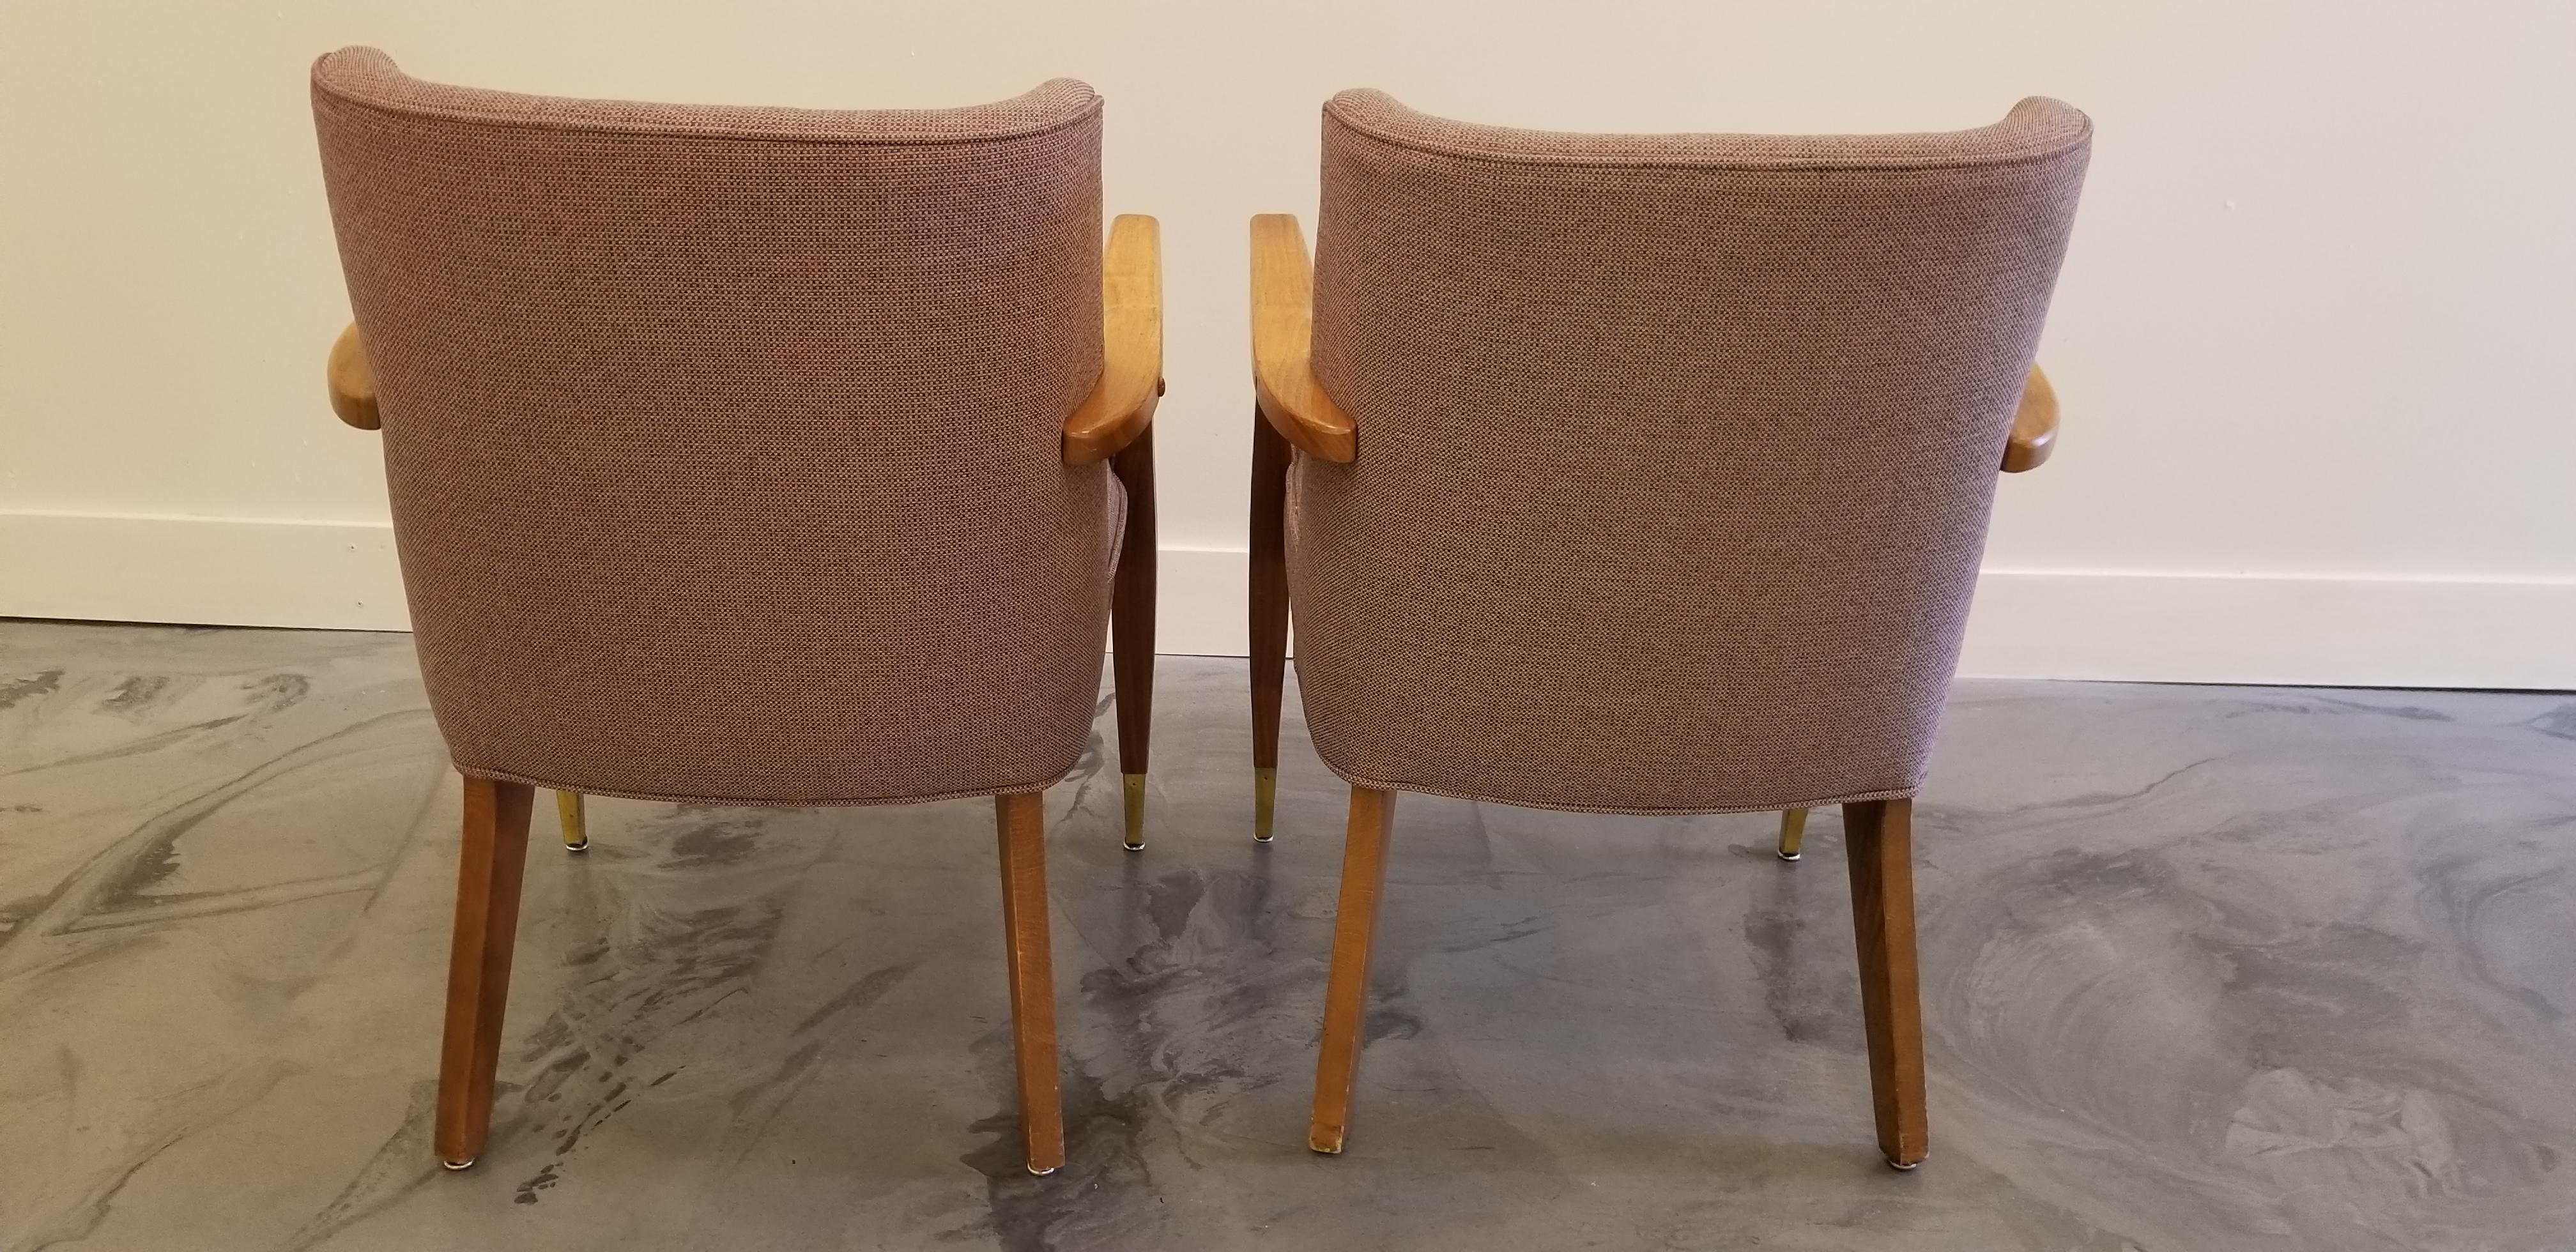 Pair Mid-Century Modern Side Chairs In Good Condition For Sale In Fulton, CA